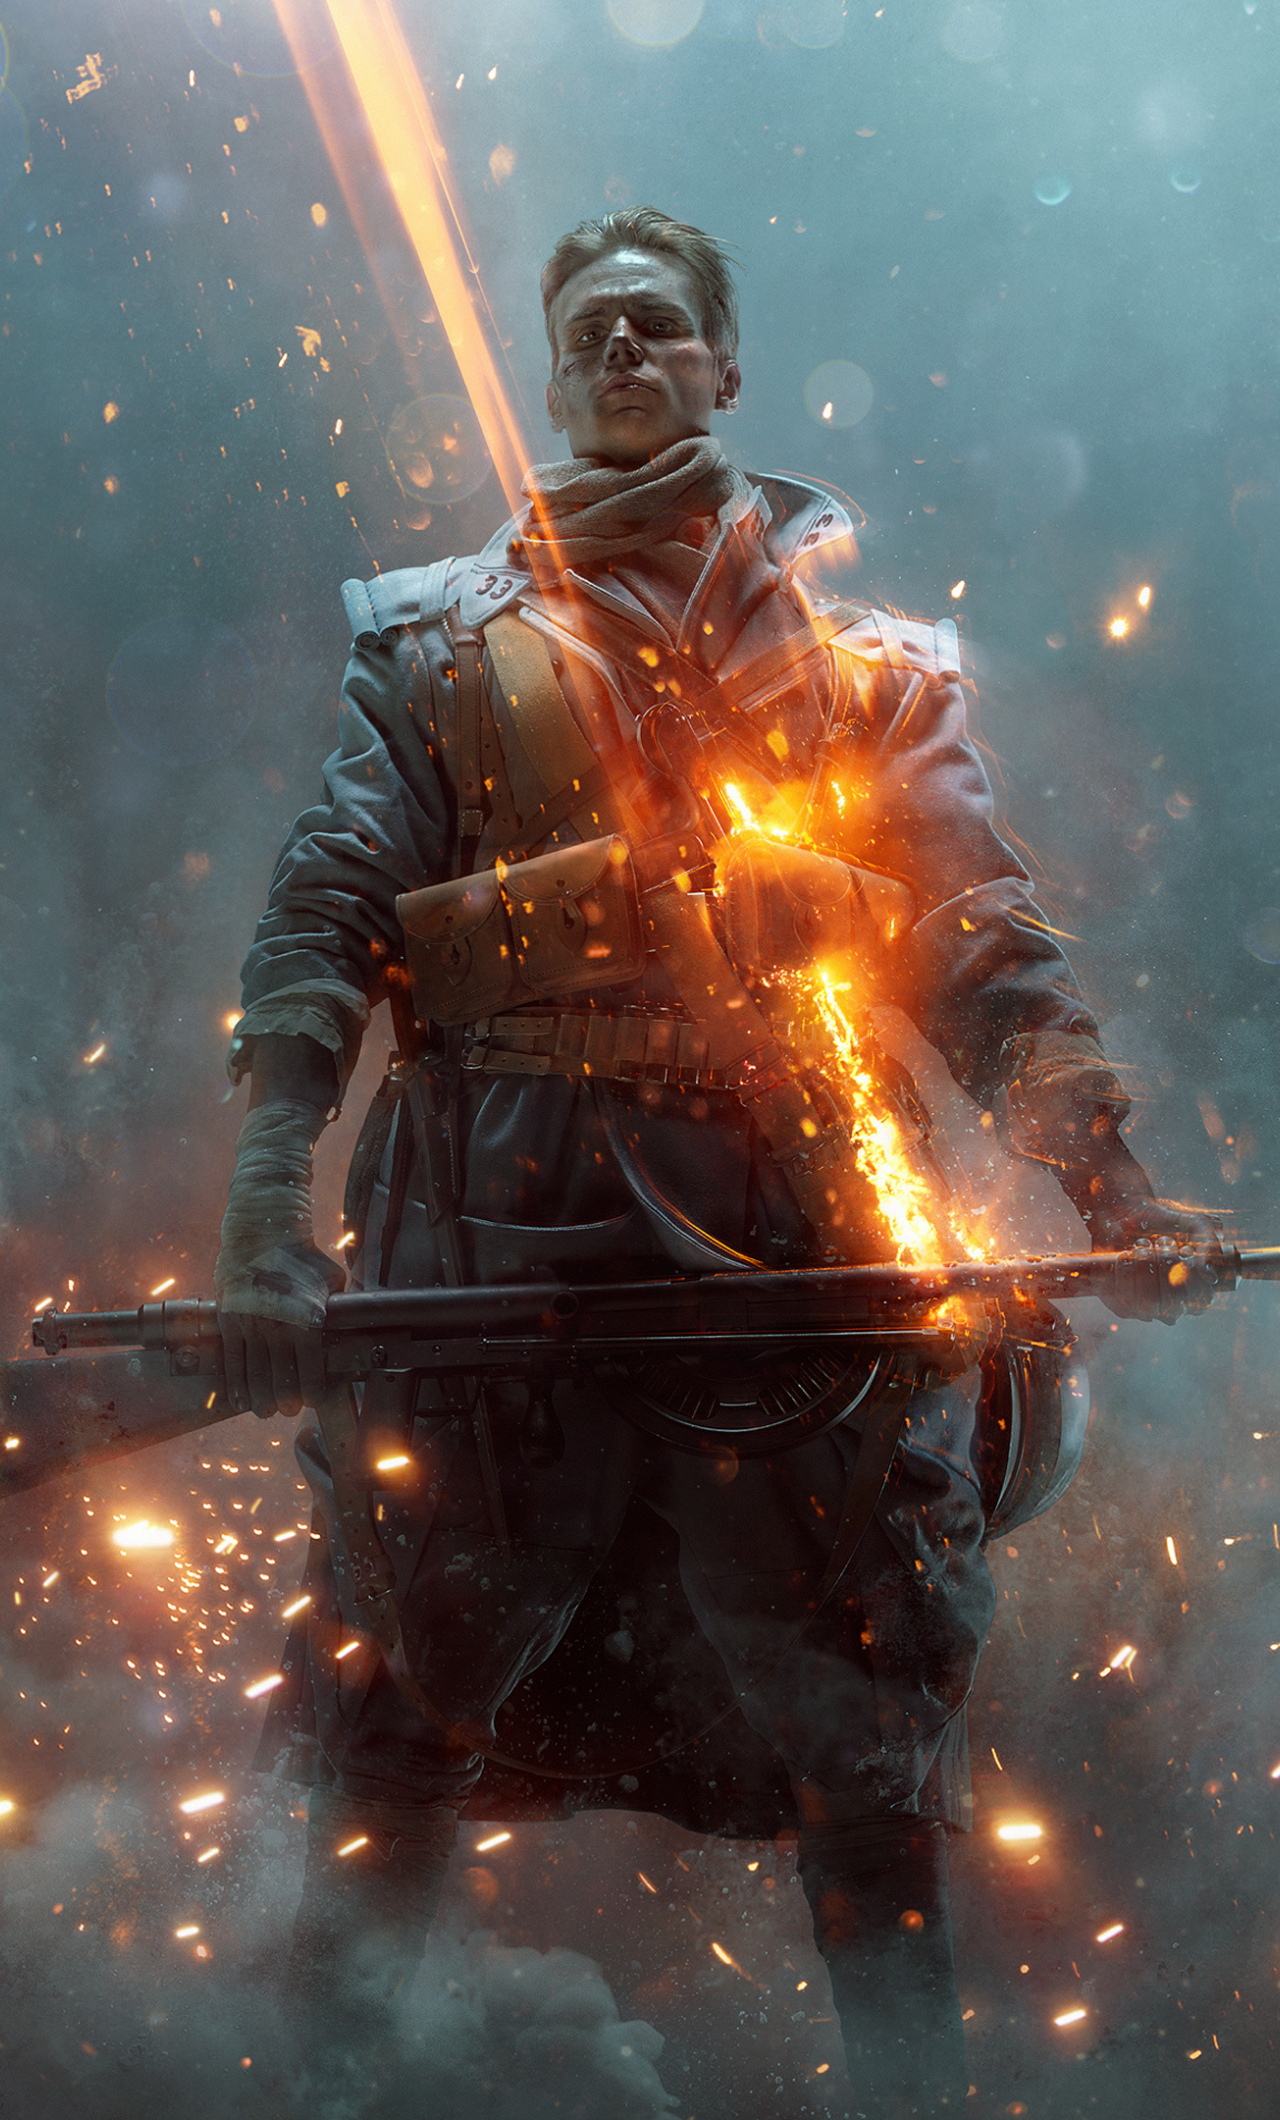 Battlefield 1, They Shall Not Pass, soldier, video game, 2017, 1280x2120 wallpaper